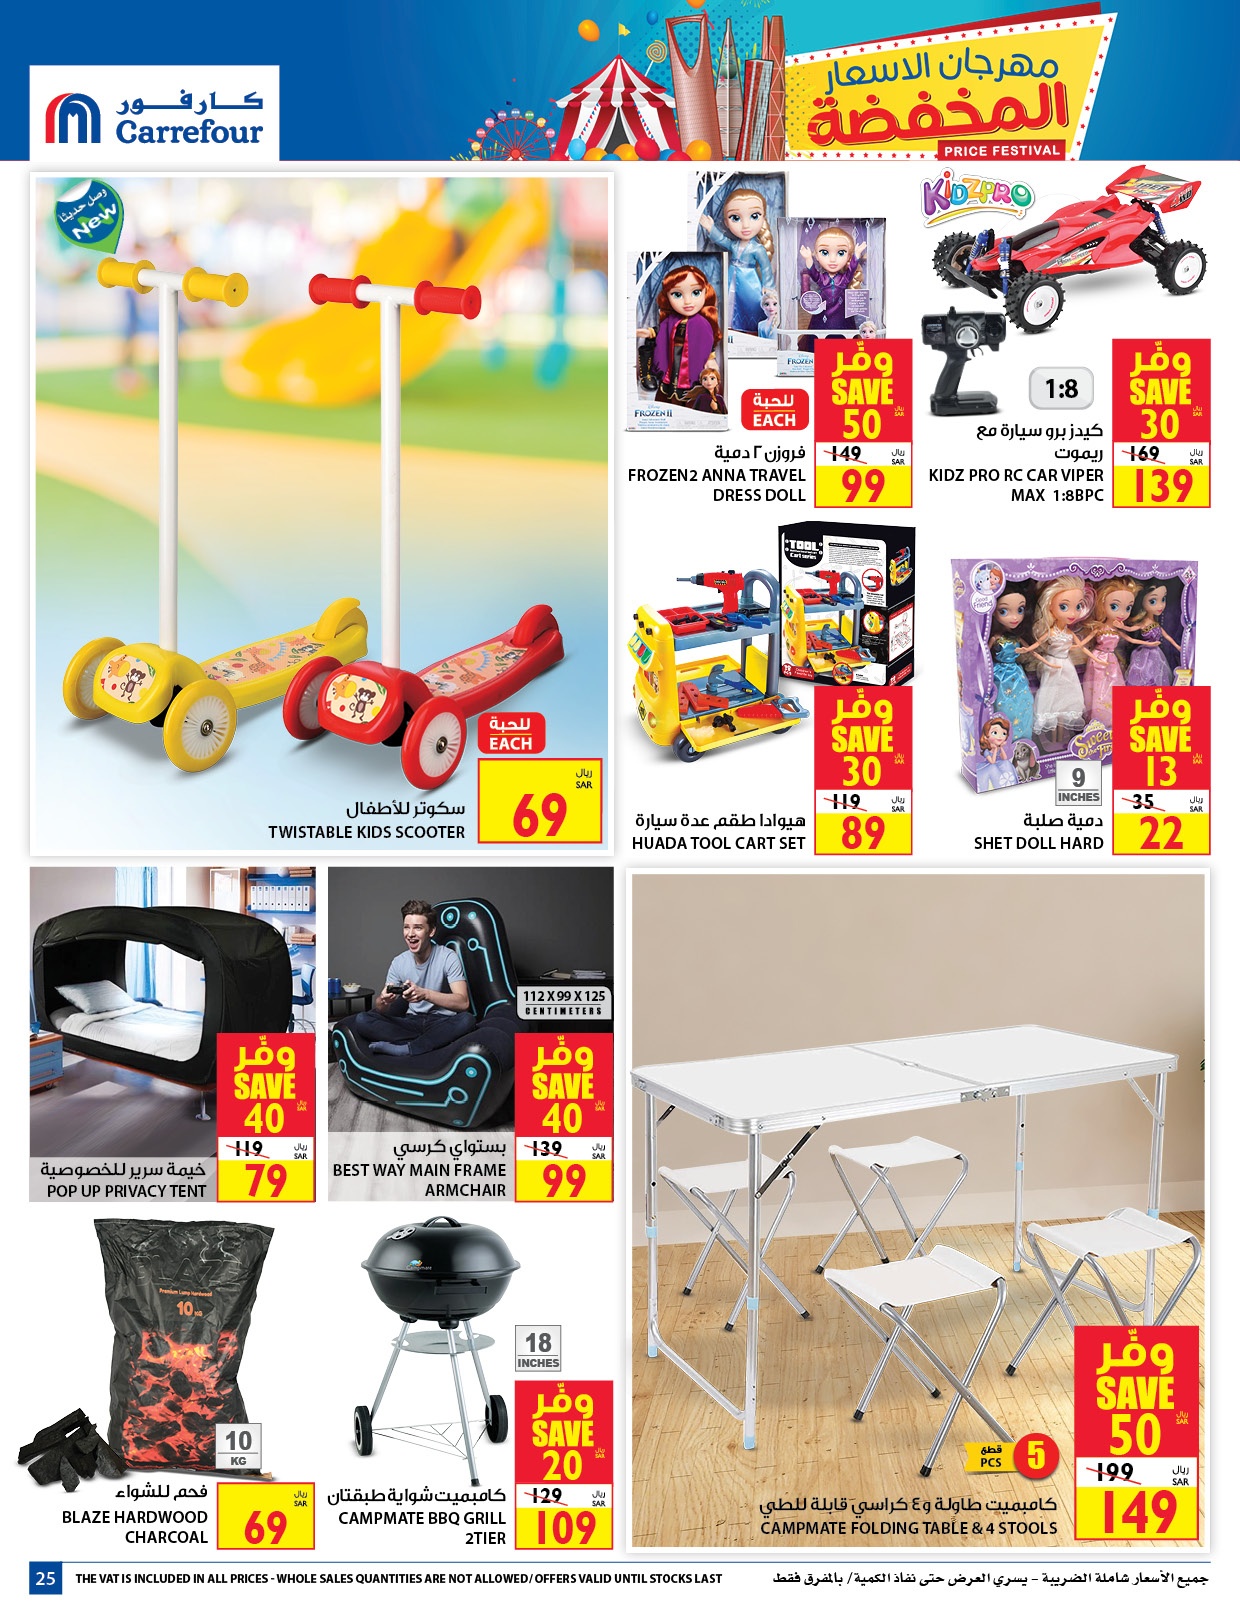 Carrefour Festival Offers from 12/8 till 25/8 | Carrefour KSA 27